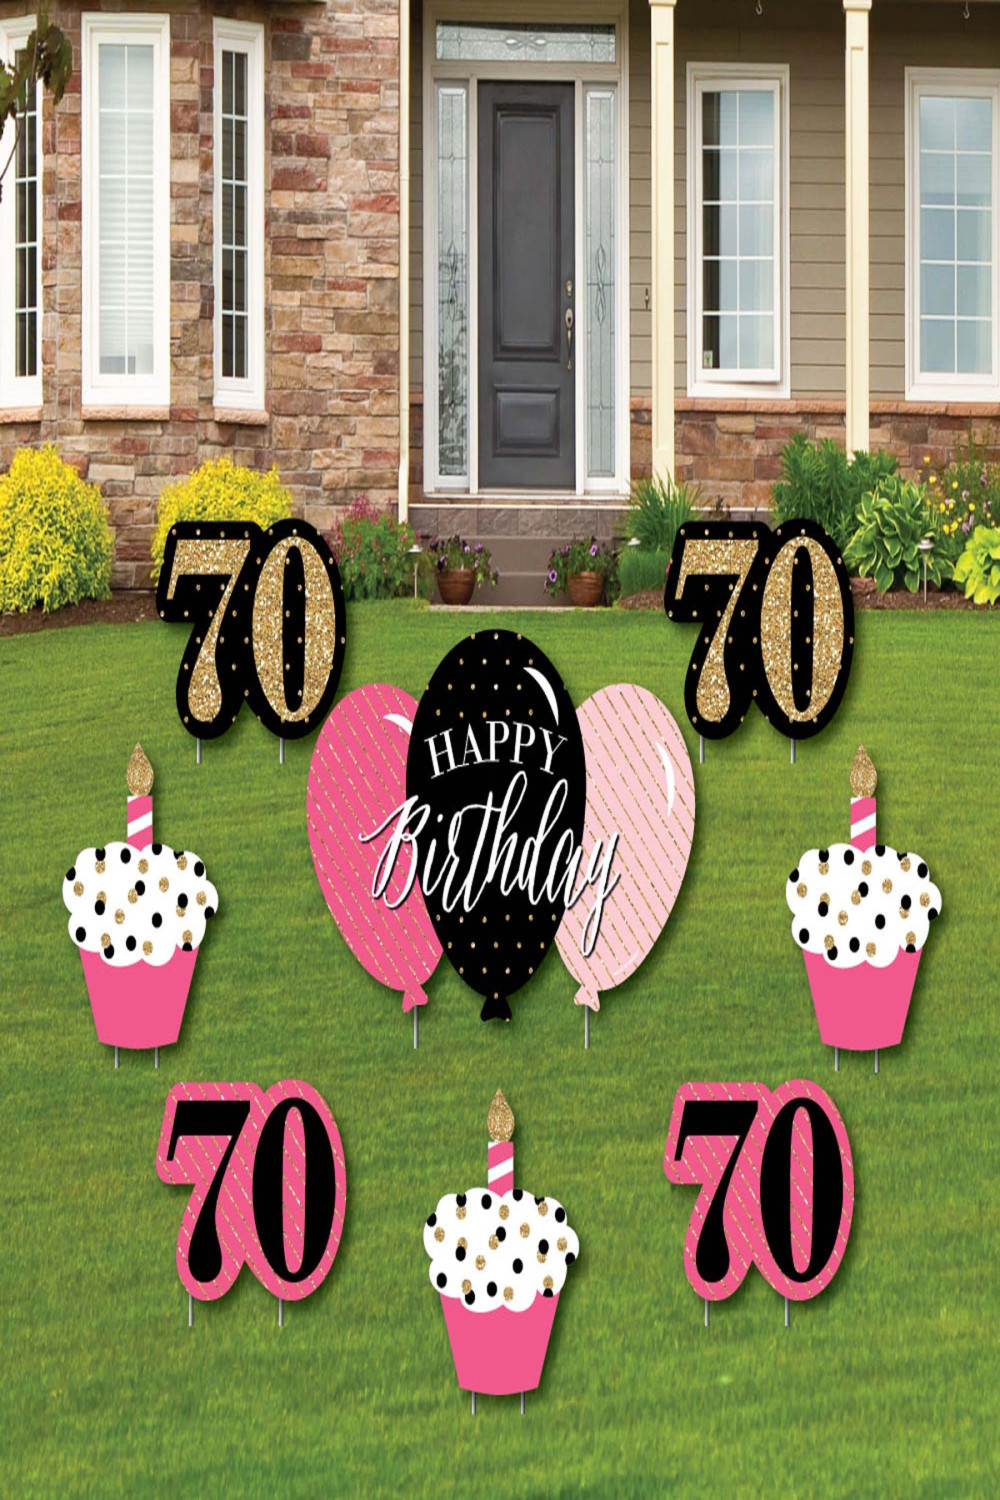 Chic th Birthday - Pink, Black and Gold - Yard Sign & Outdoor Lawn  Decorations - Birthday Party Yard Signs - Set of